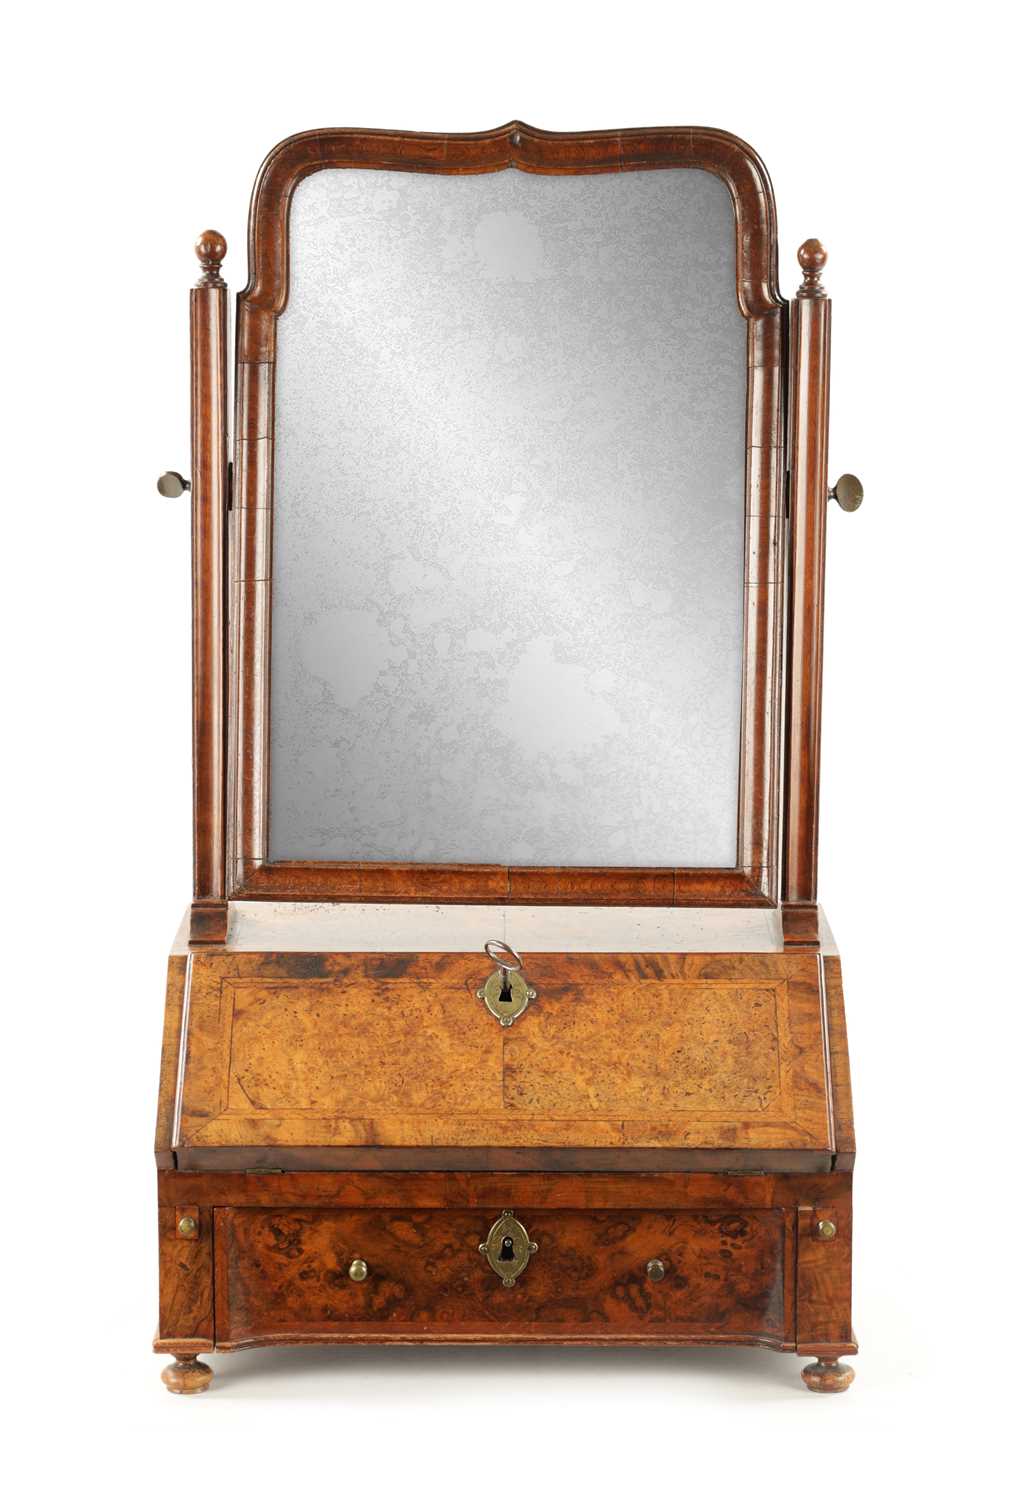 Lot 356 - A FINE QUEEN ANNE HERRINGBONE BANDED AND BURR WALNUT TABLE MIRROR